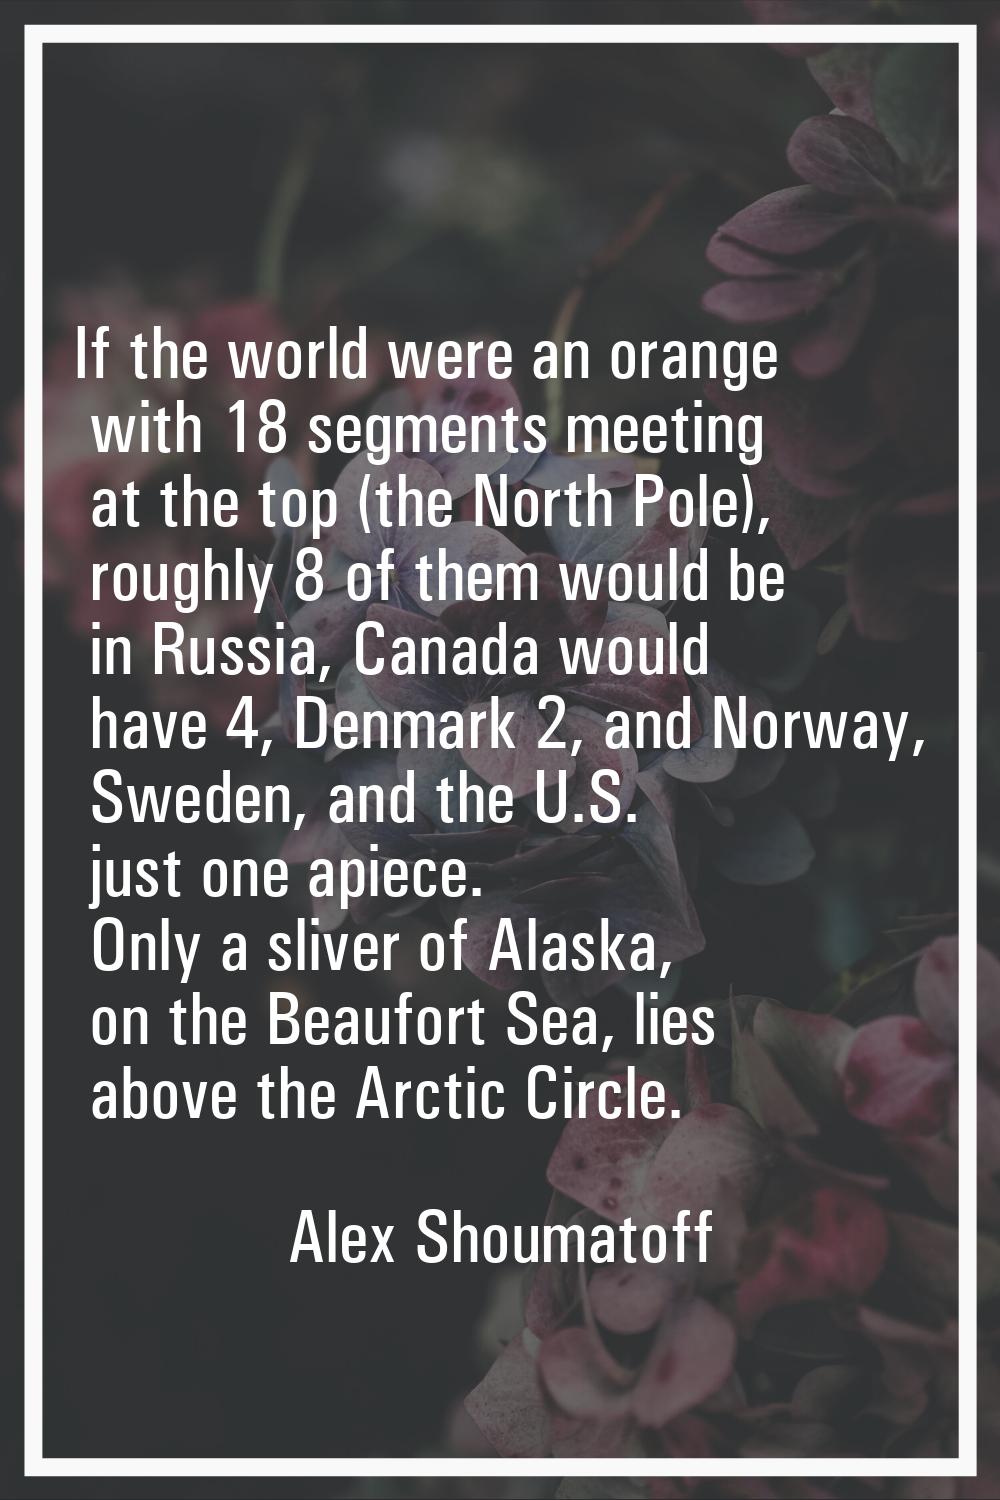 If the world were an orange with 18 segments meeting at the top (the North Pole), roughly 8 of them